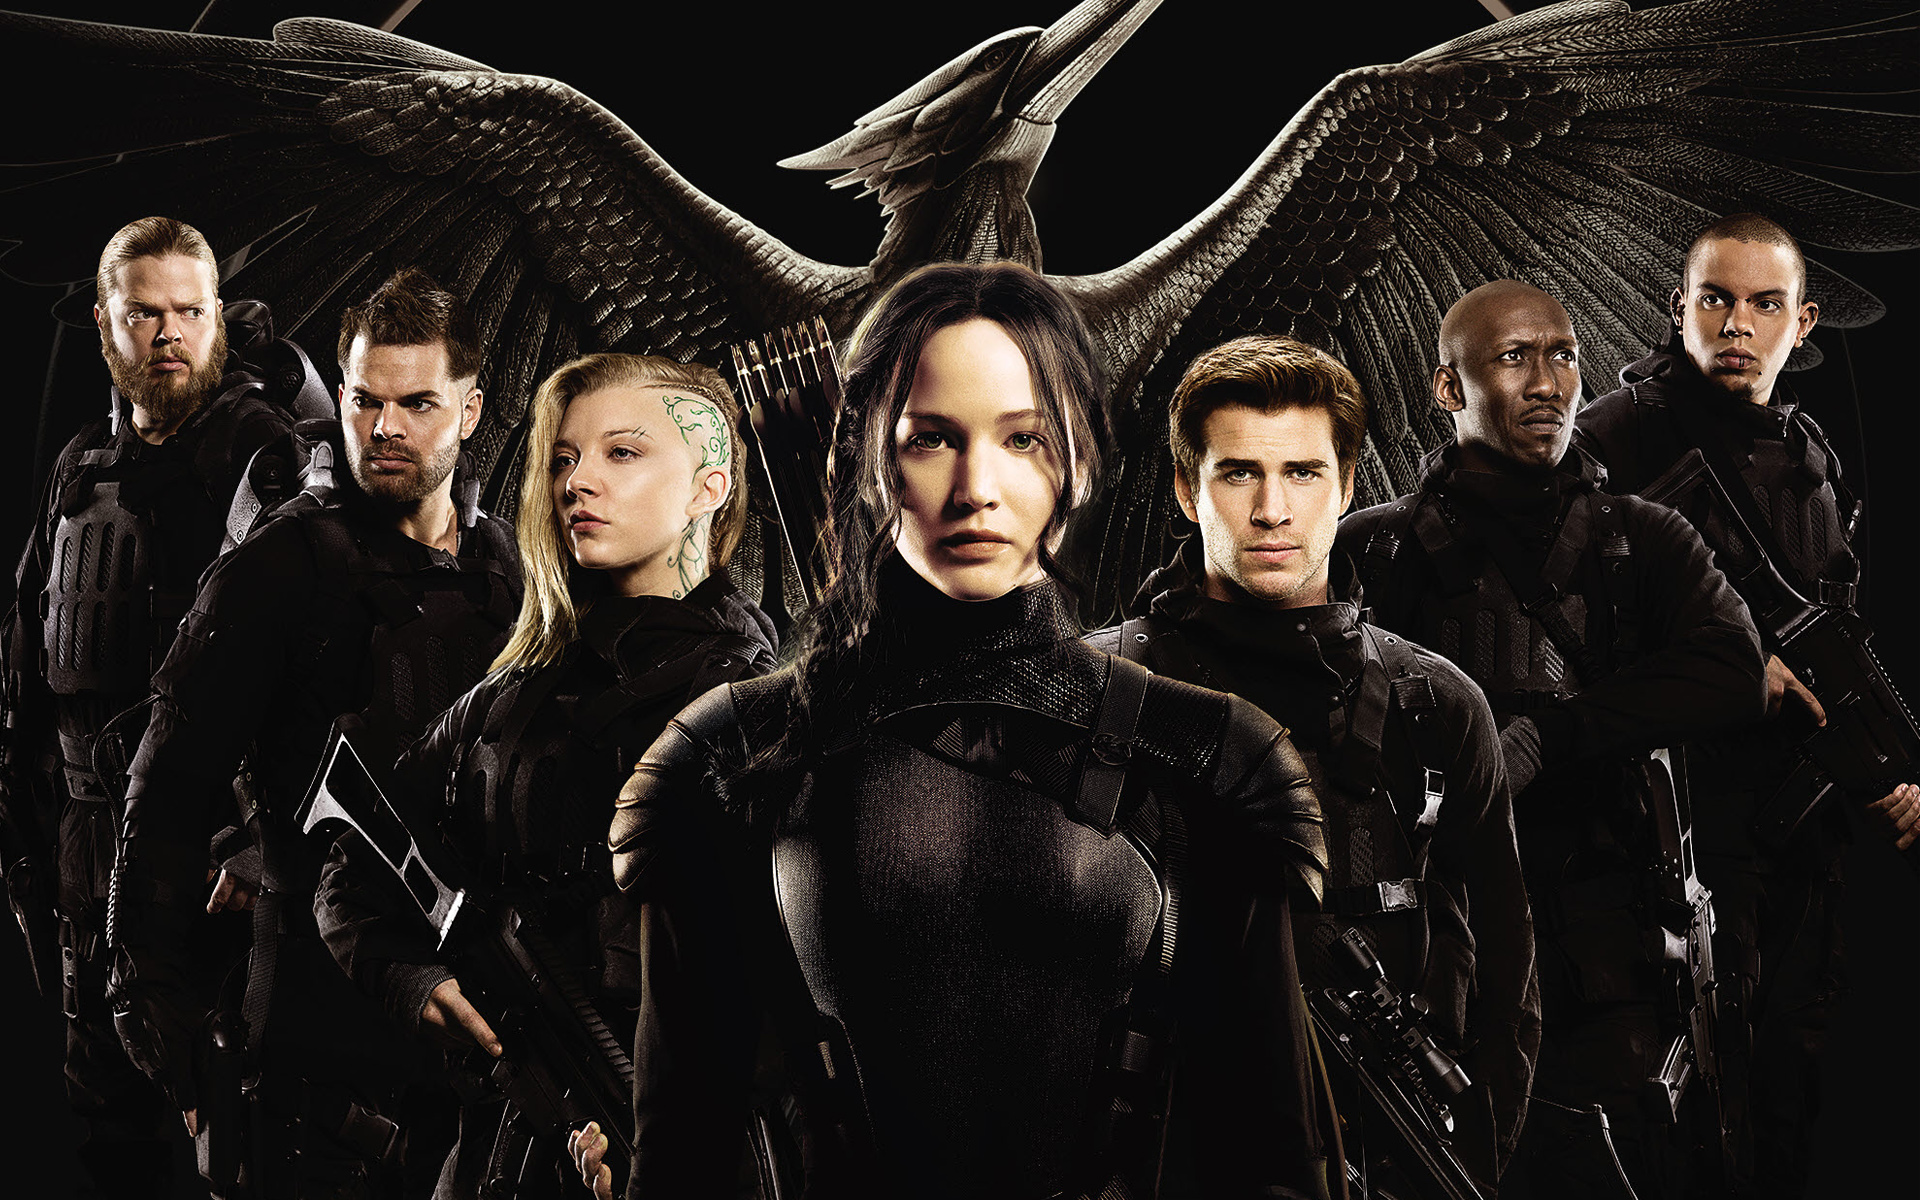 4139503-the-hunger-games-mockingjay-part-1-movie